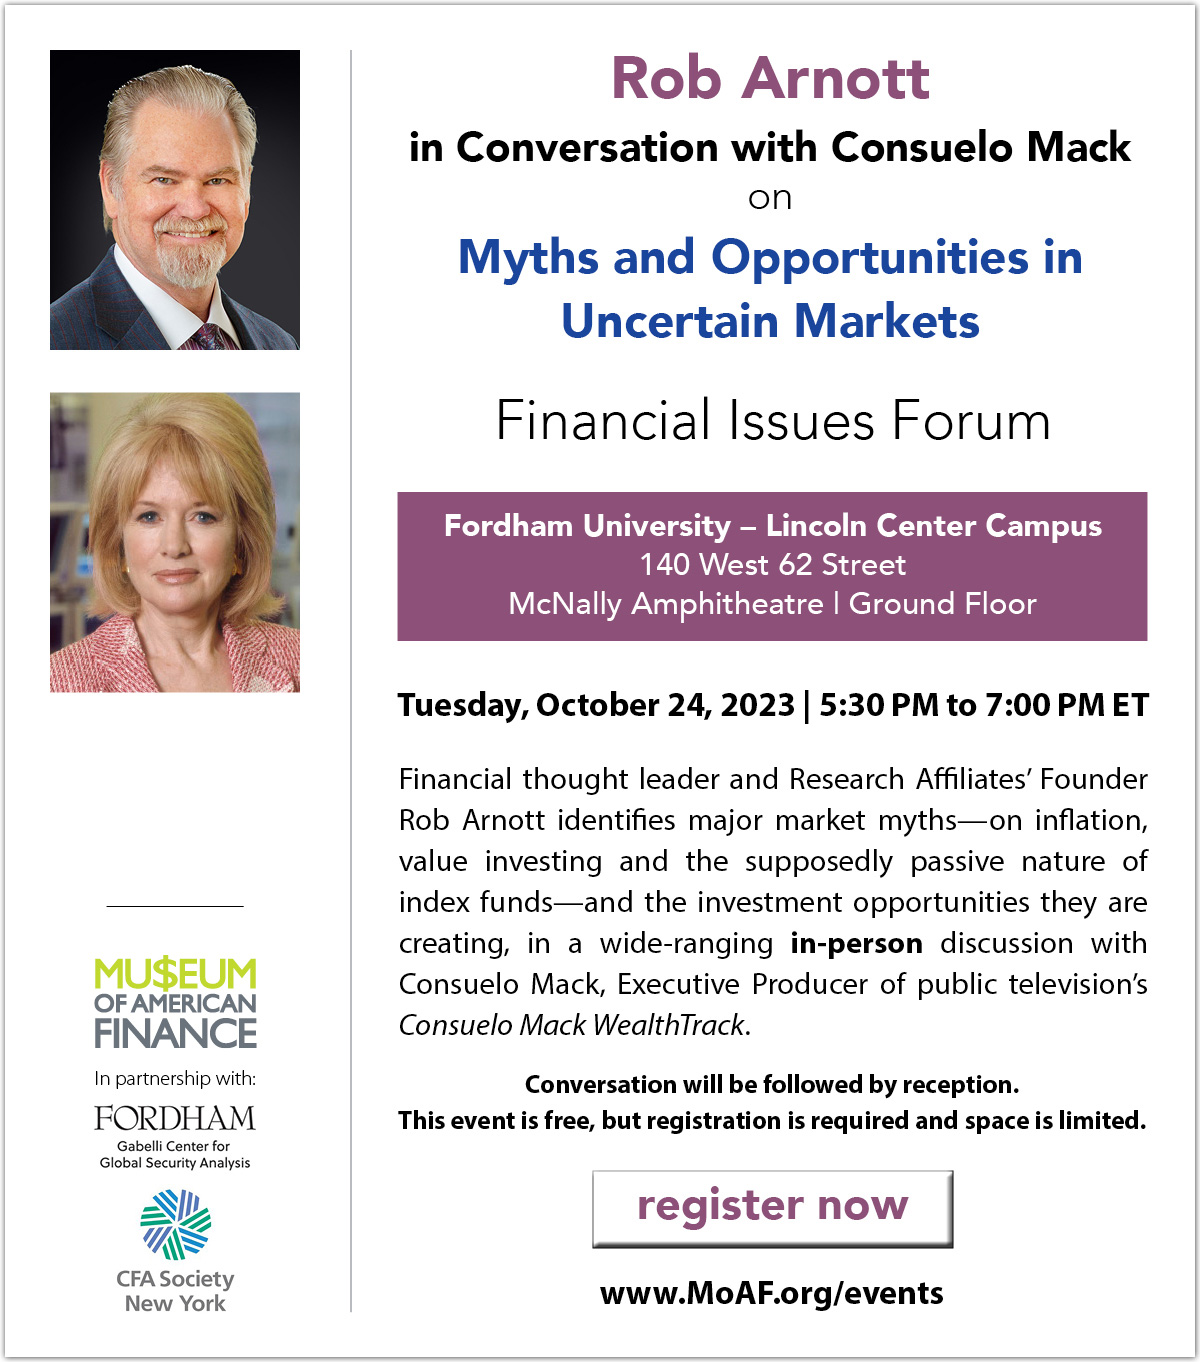 Rob Arnott and Consuelo Mack on Myths and Opportunities in Uncertain Markets